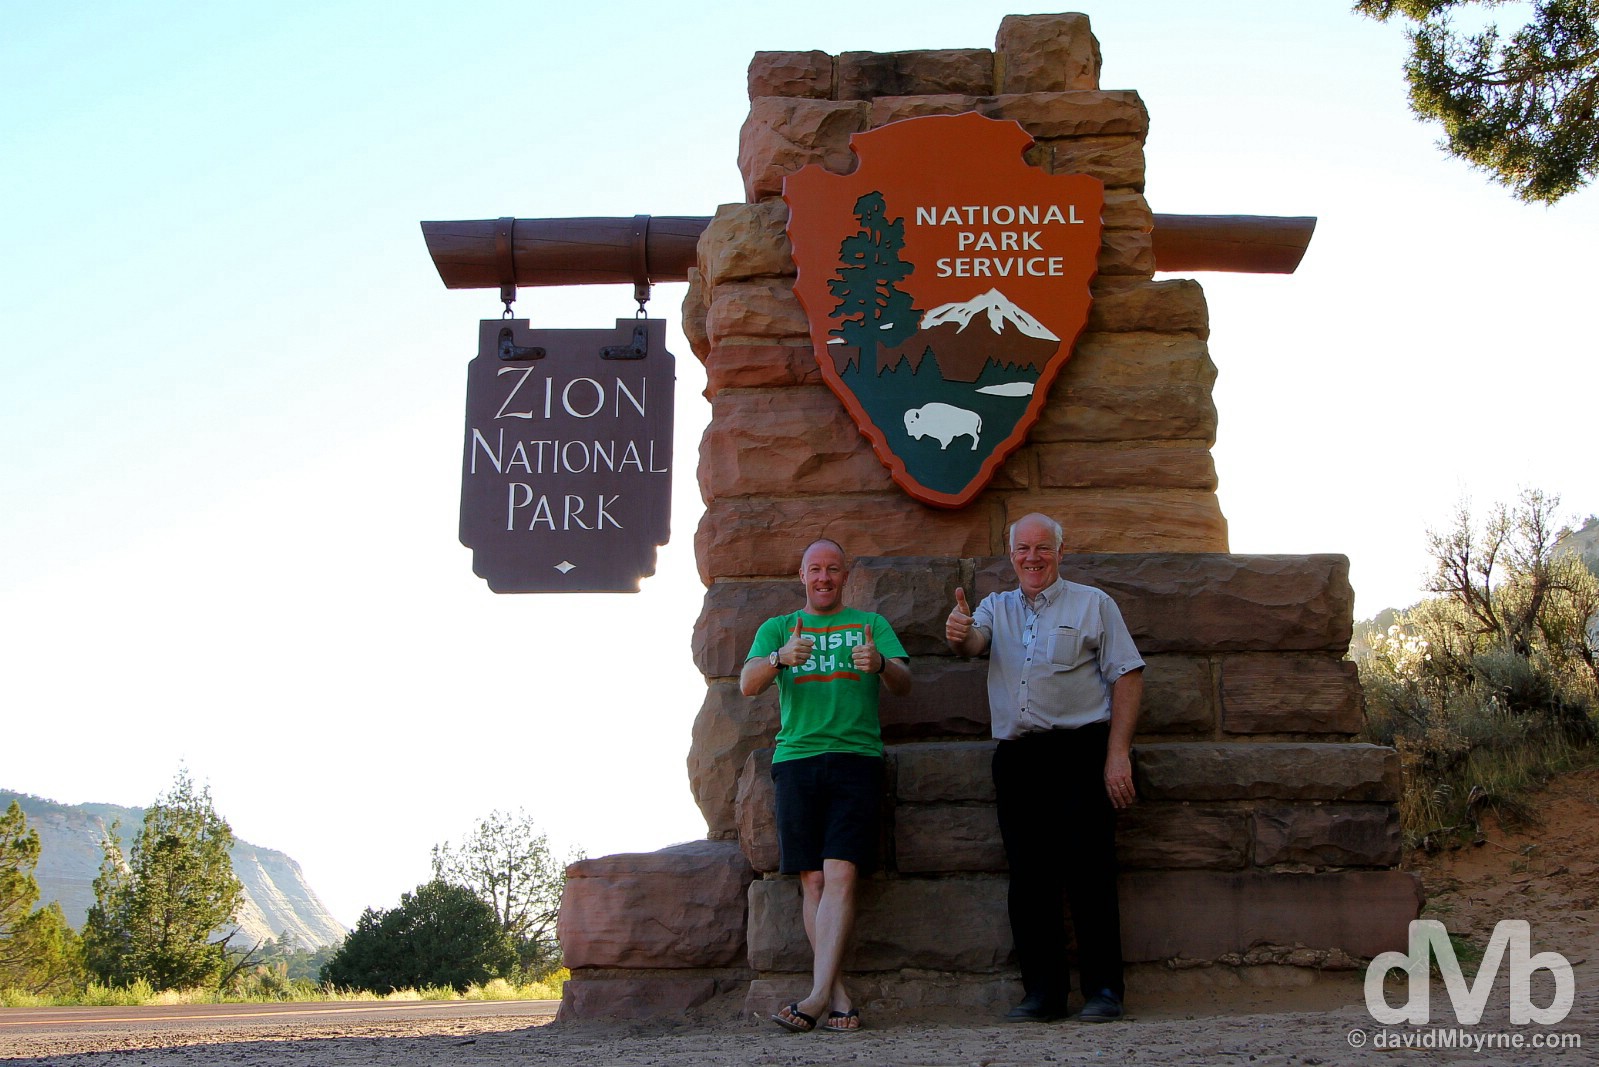 At the entrance to Zion National Park, southern Utah, USA. September 8, 2016.